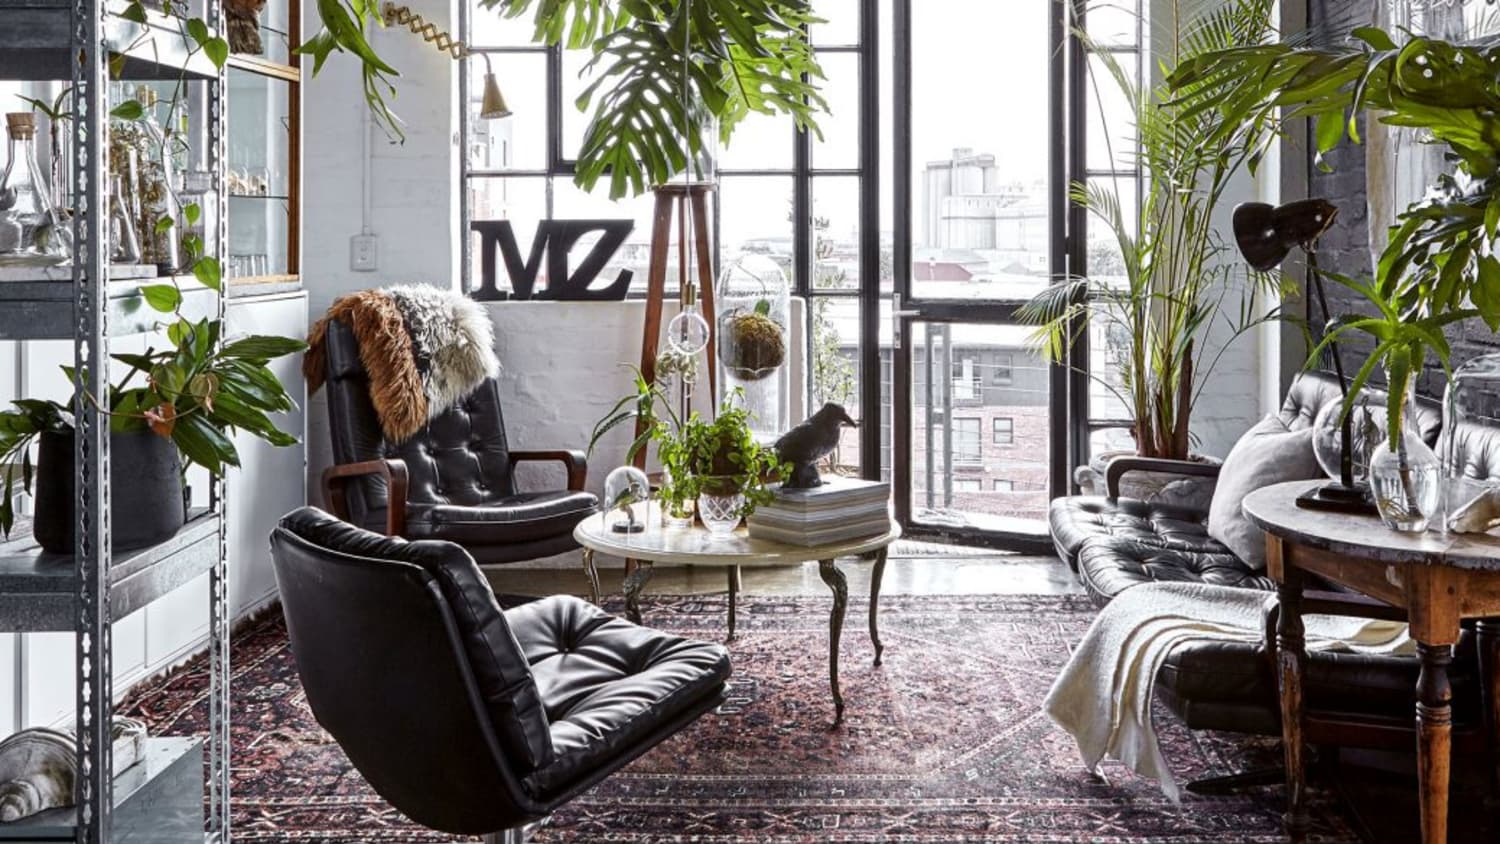 Decor Styles to Mix - Hygge Gothic Jungalow | Apartment Therapy